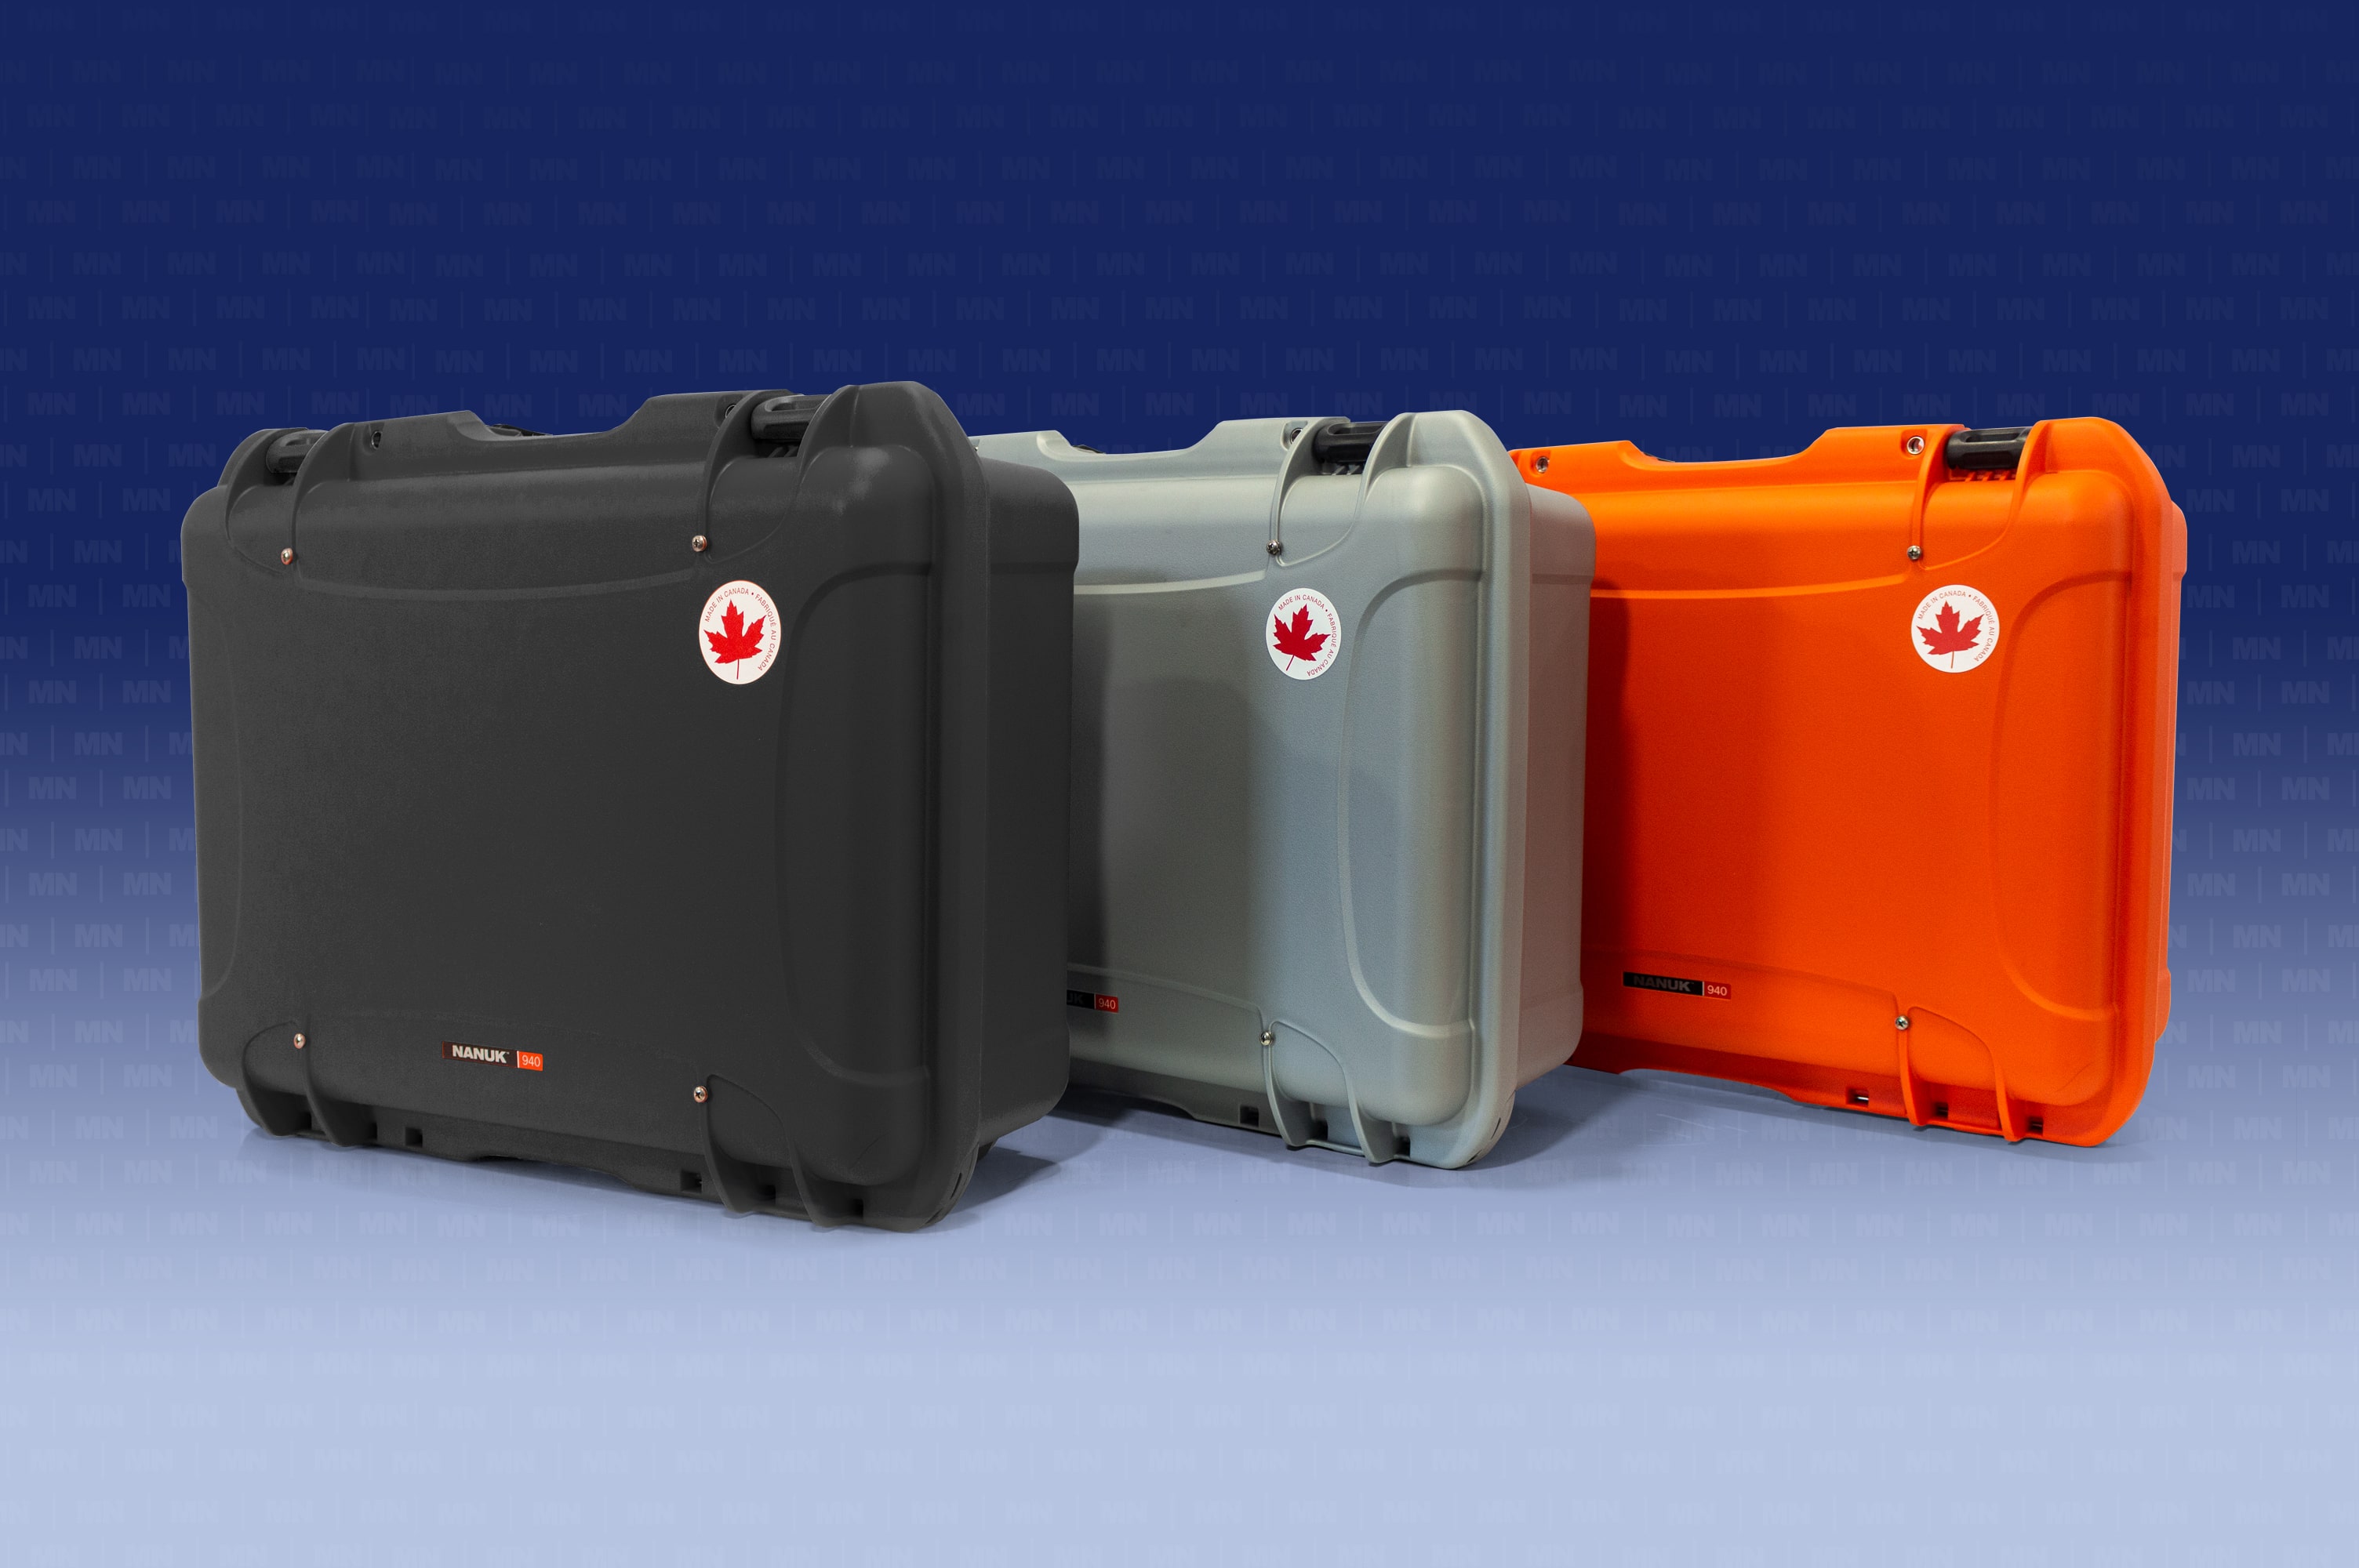 All major system components ship in rugged IP rated Canadian made cases